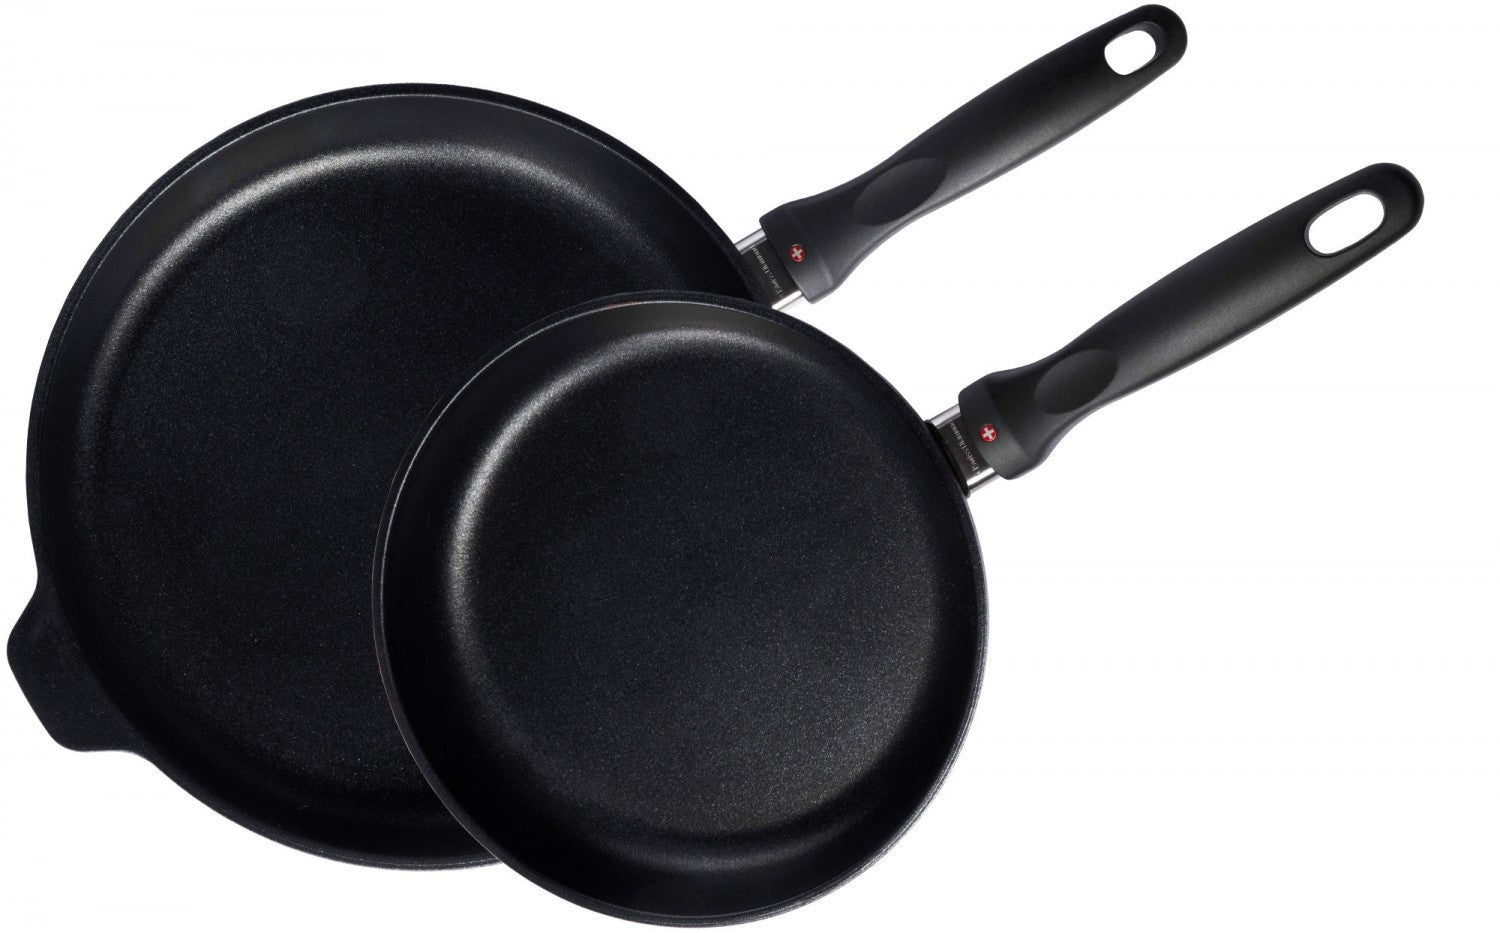 Swiss Diamond Induction Nonstick Square Saute Pan with Lid